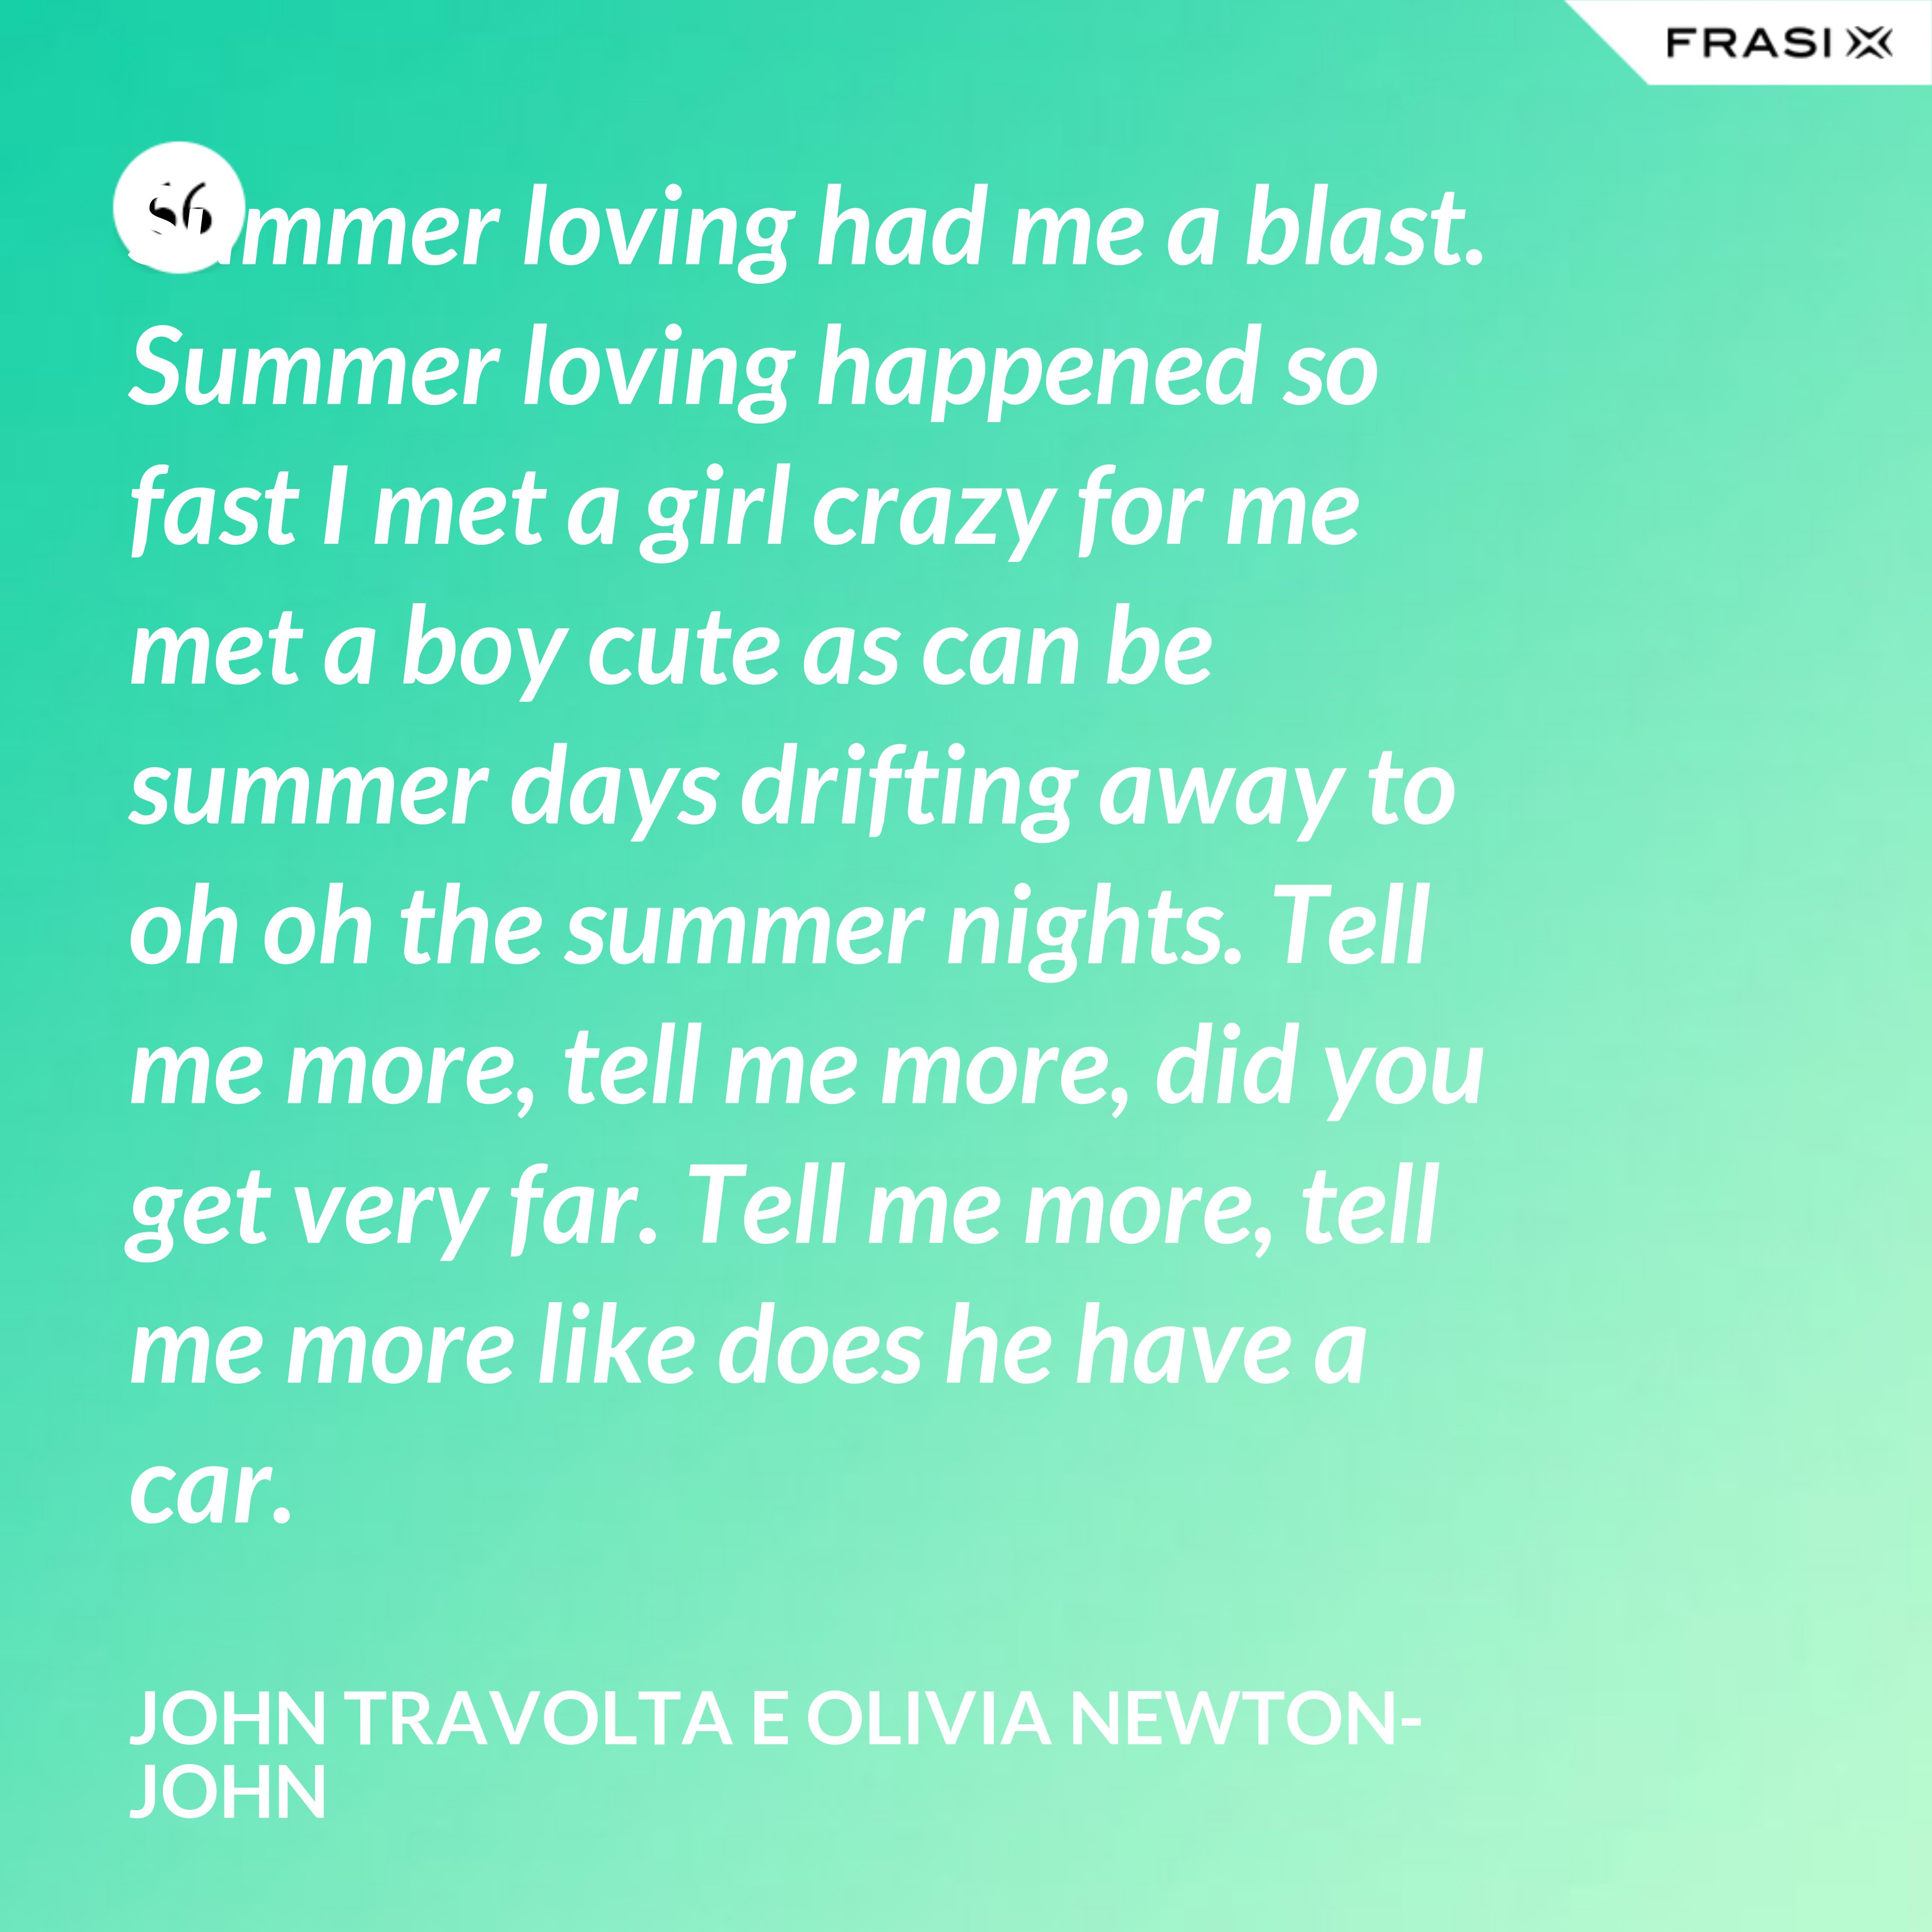 Summer loving had me a blast. Summer loving happened so fast I met a girl crazy for me met a boy cute as can be summer days drifting away to oh oh the summer nights. Tell me more, tell me more, did you get very far. Tell me more, tell me more like does he have a car. - John Travolta e Olivia Newton-John